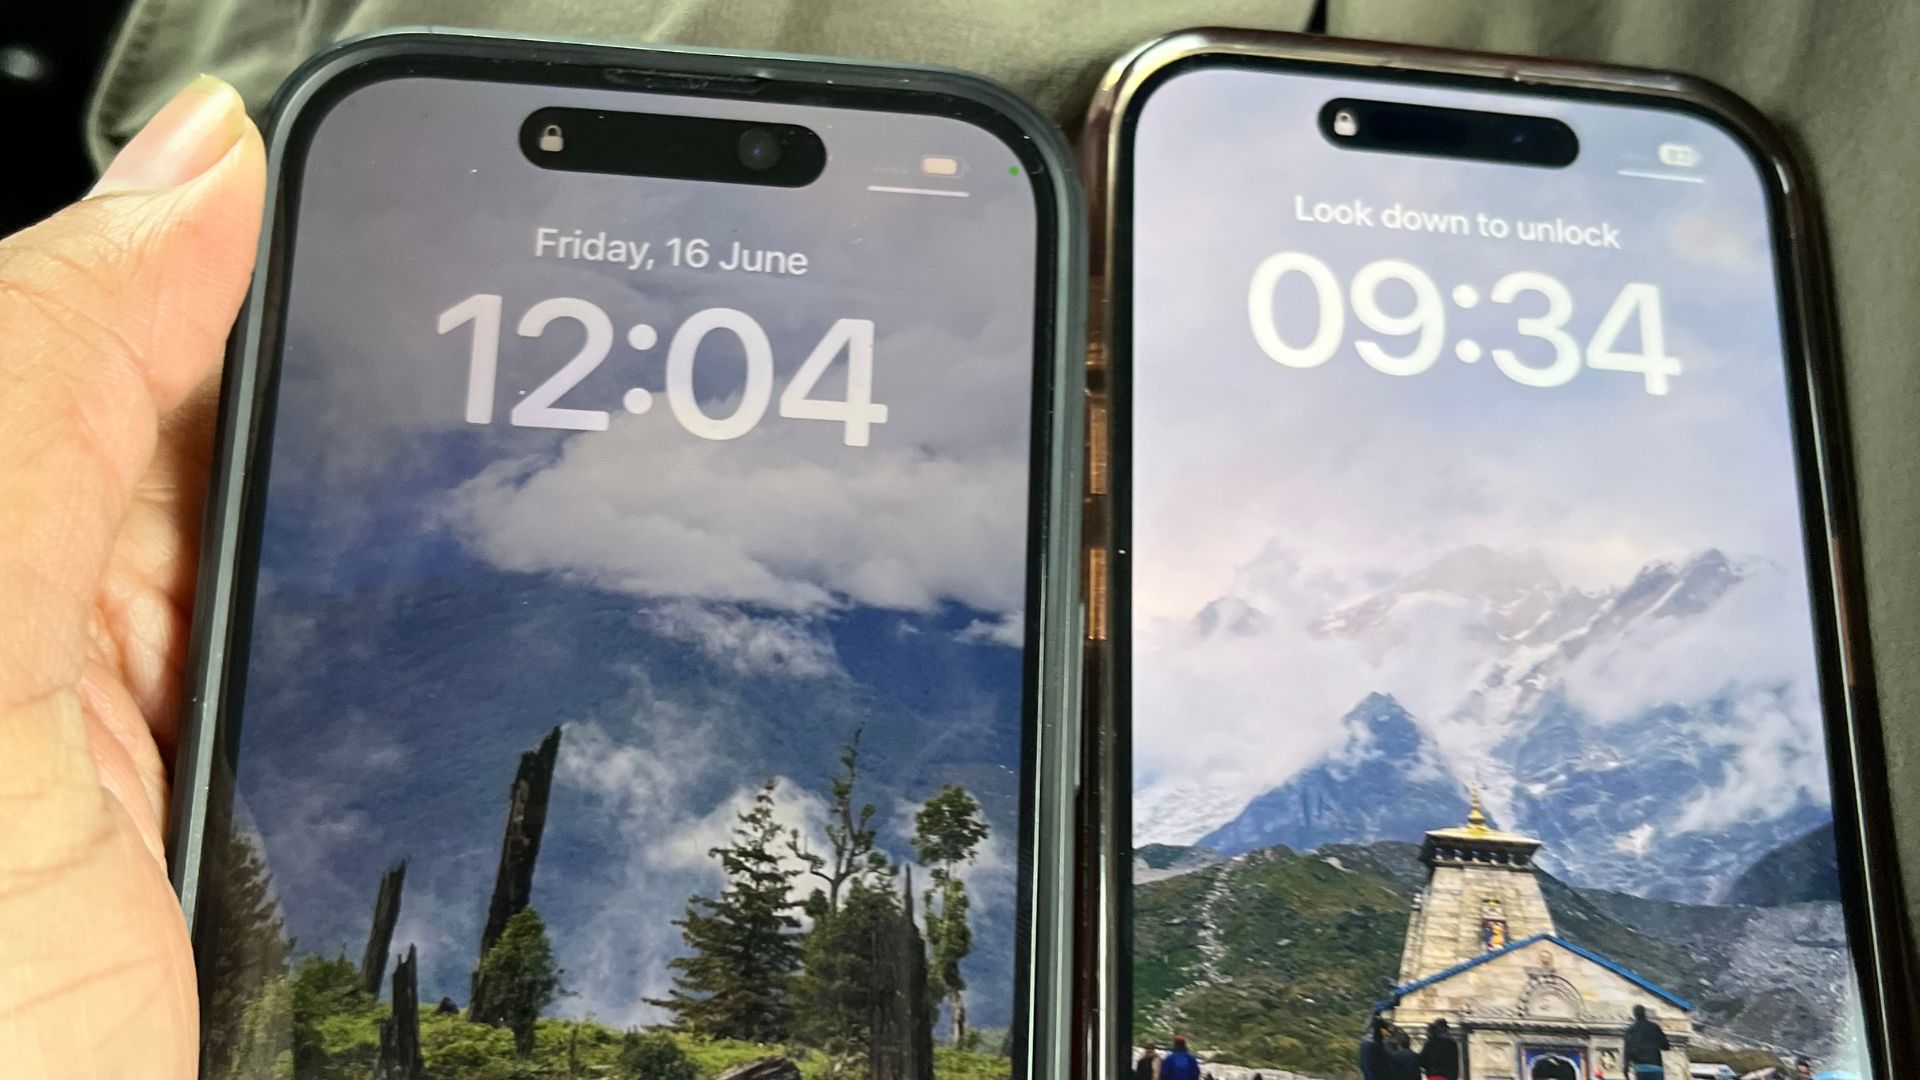 China time showing on phones near the border